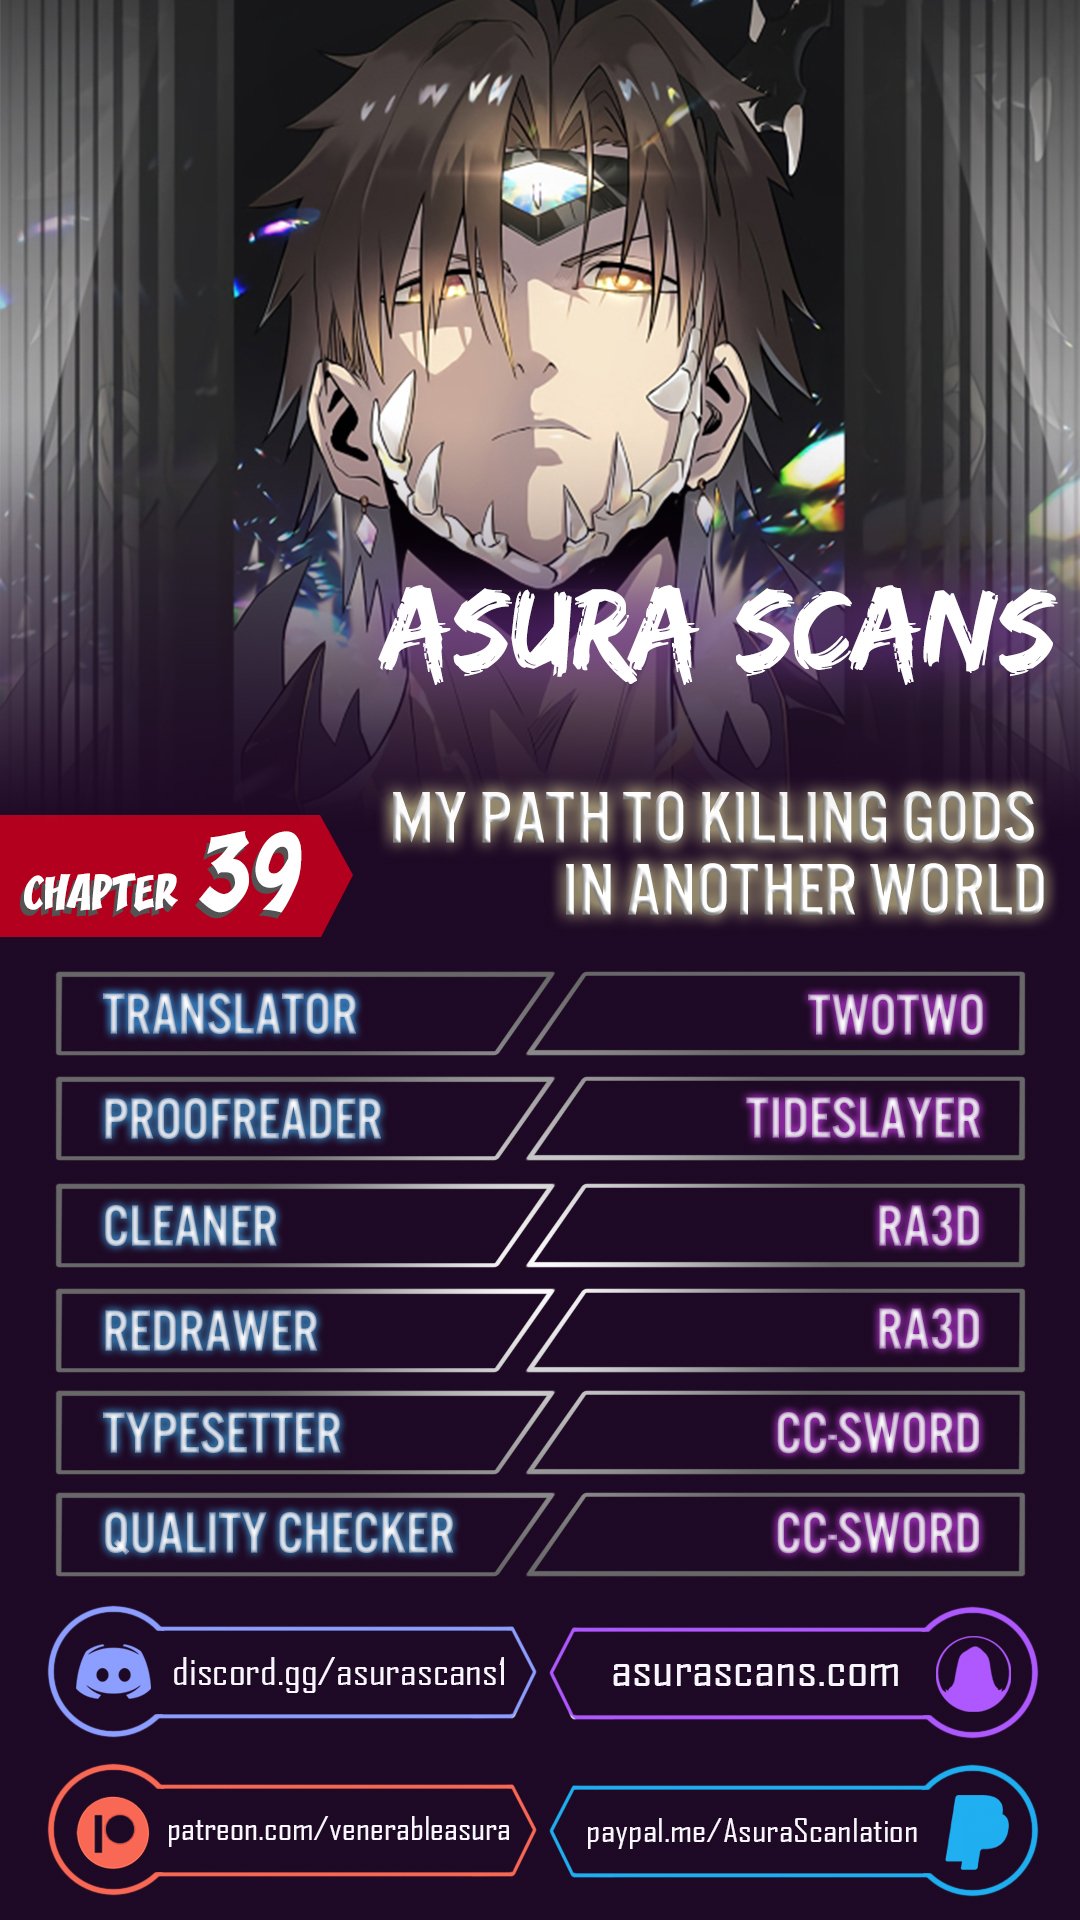 My Path to Killing Gods in Another World - Chapter 23190 - Image 1